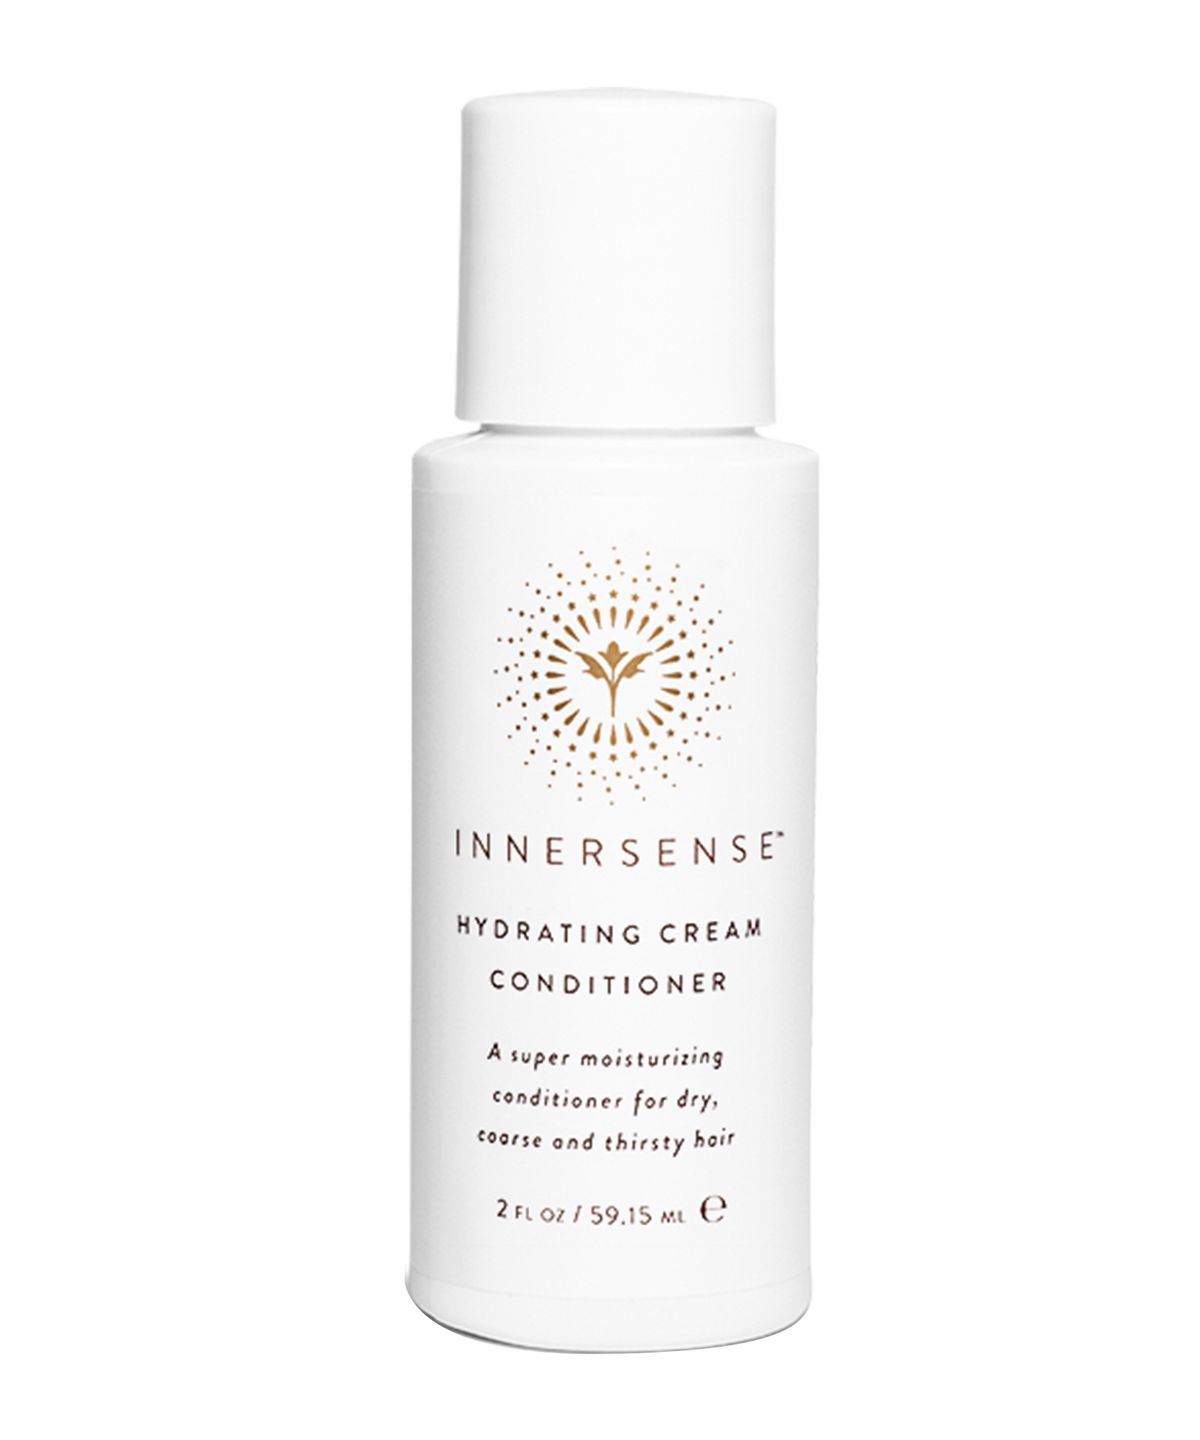 Clean Beauty Products for Mature Skin: Innersense Hydrating Cream Conditioner